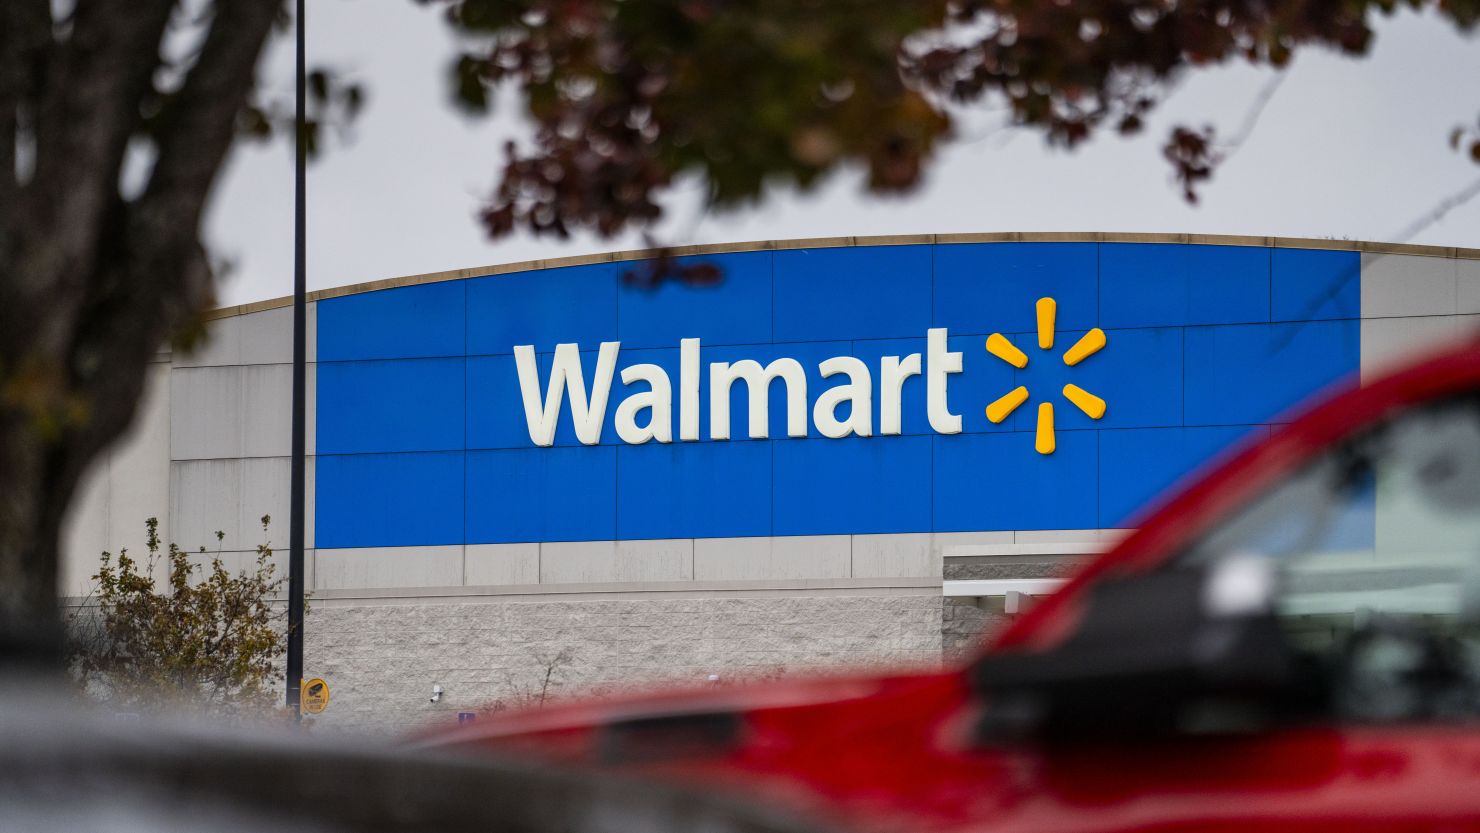 Walmart Customers Can Claim Up to 500 as Part of Class Action Settlement